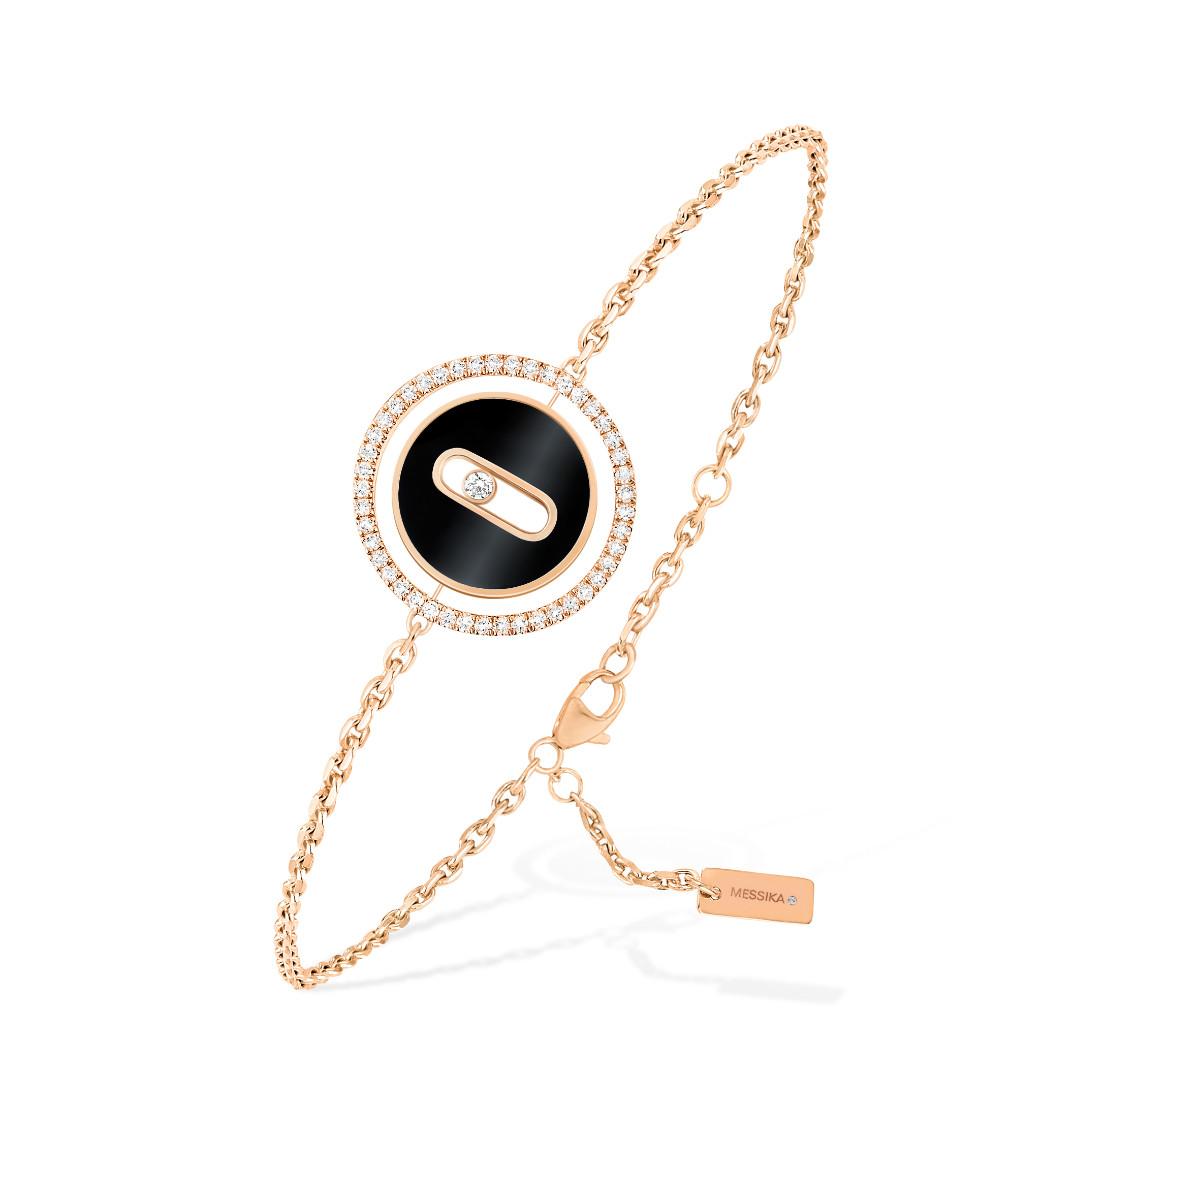 Messika Presents Its 'Lucky Move Color Onyx' Jewellery Novelty